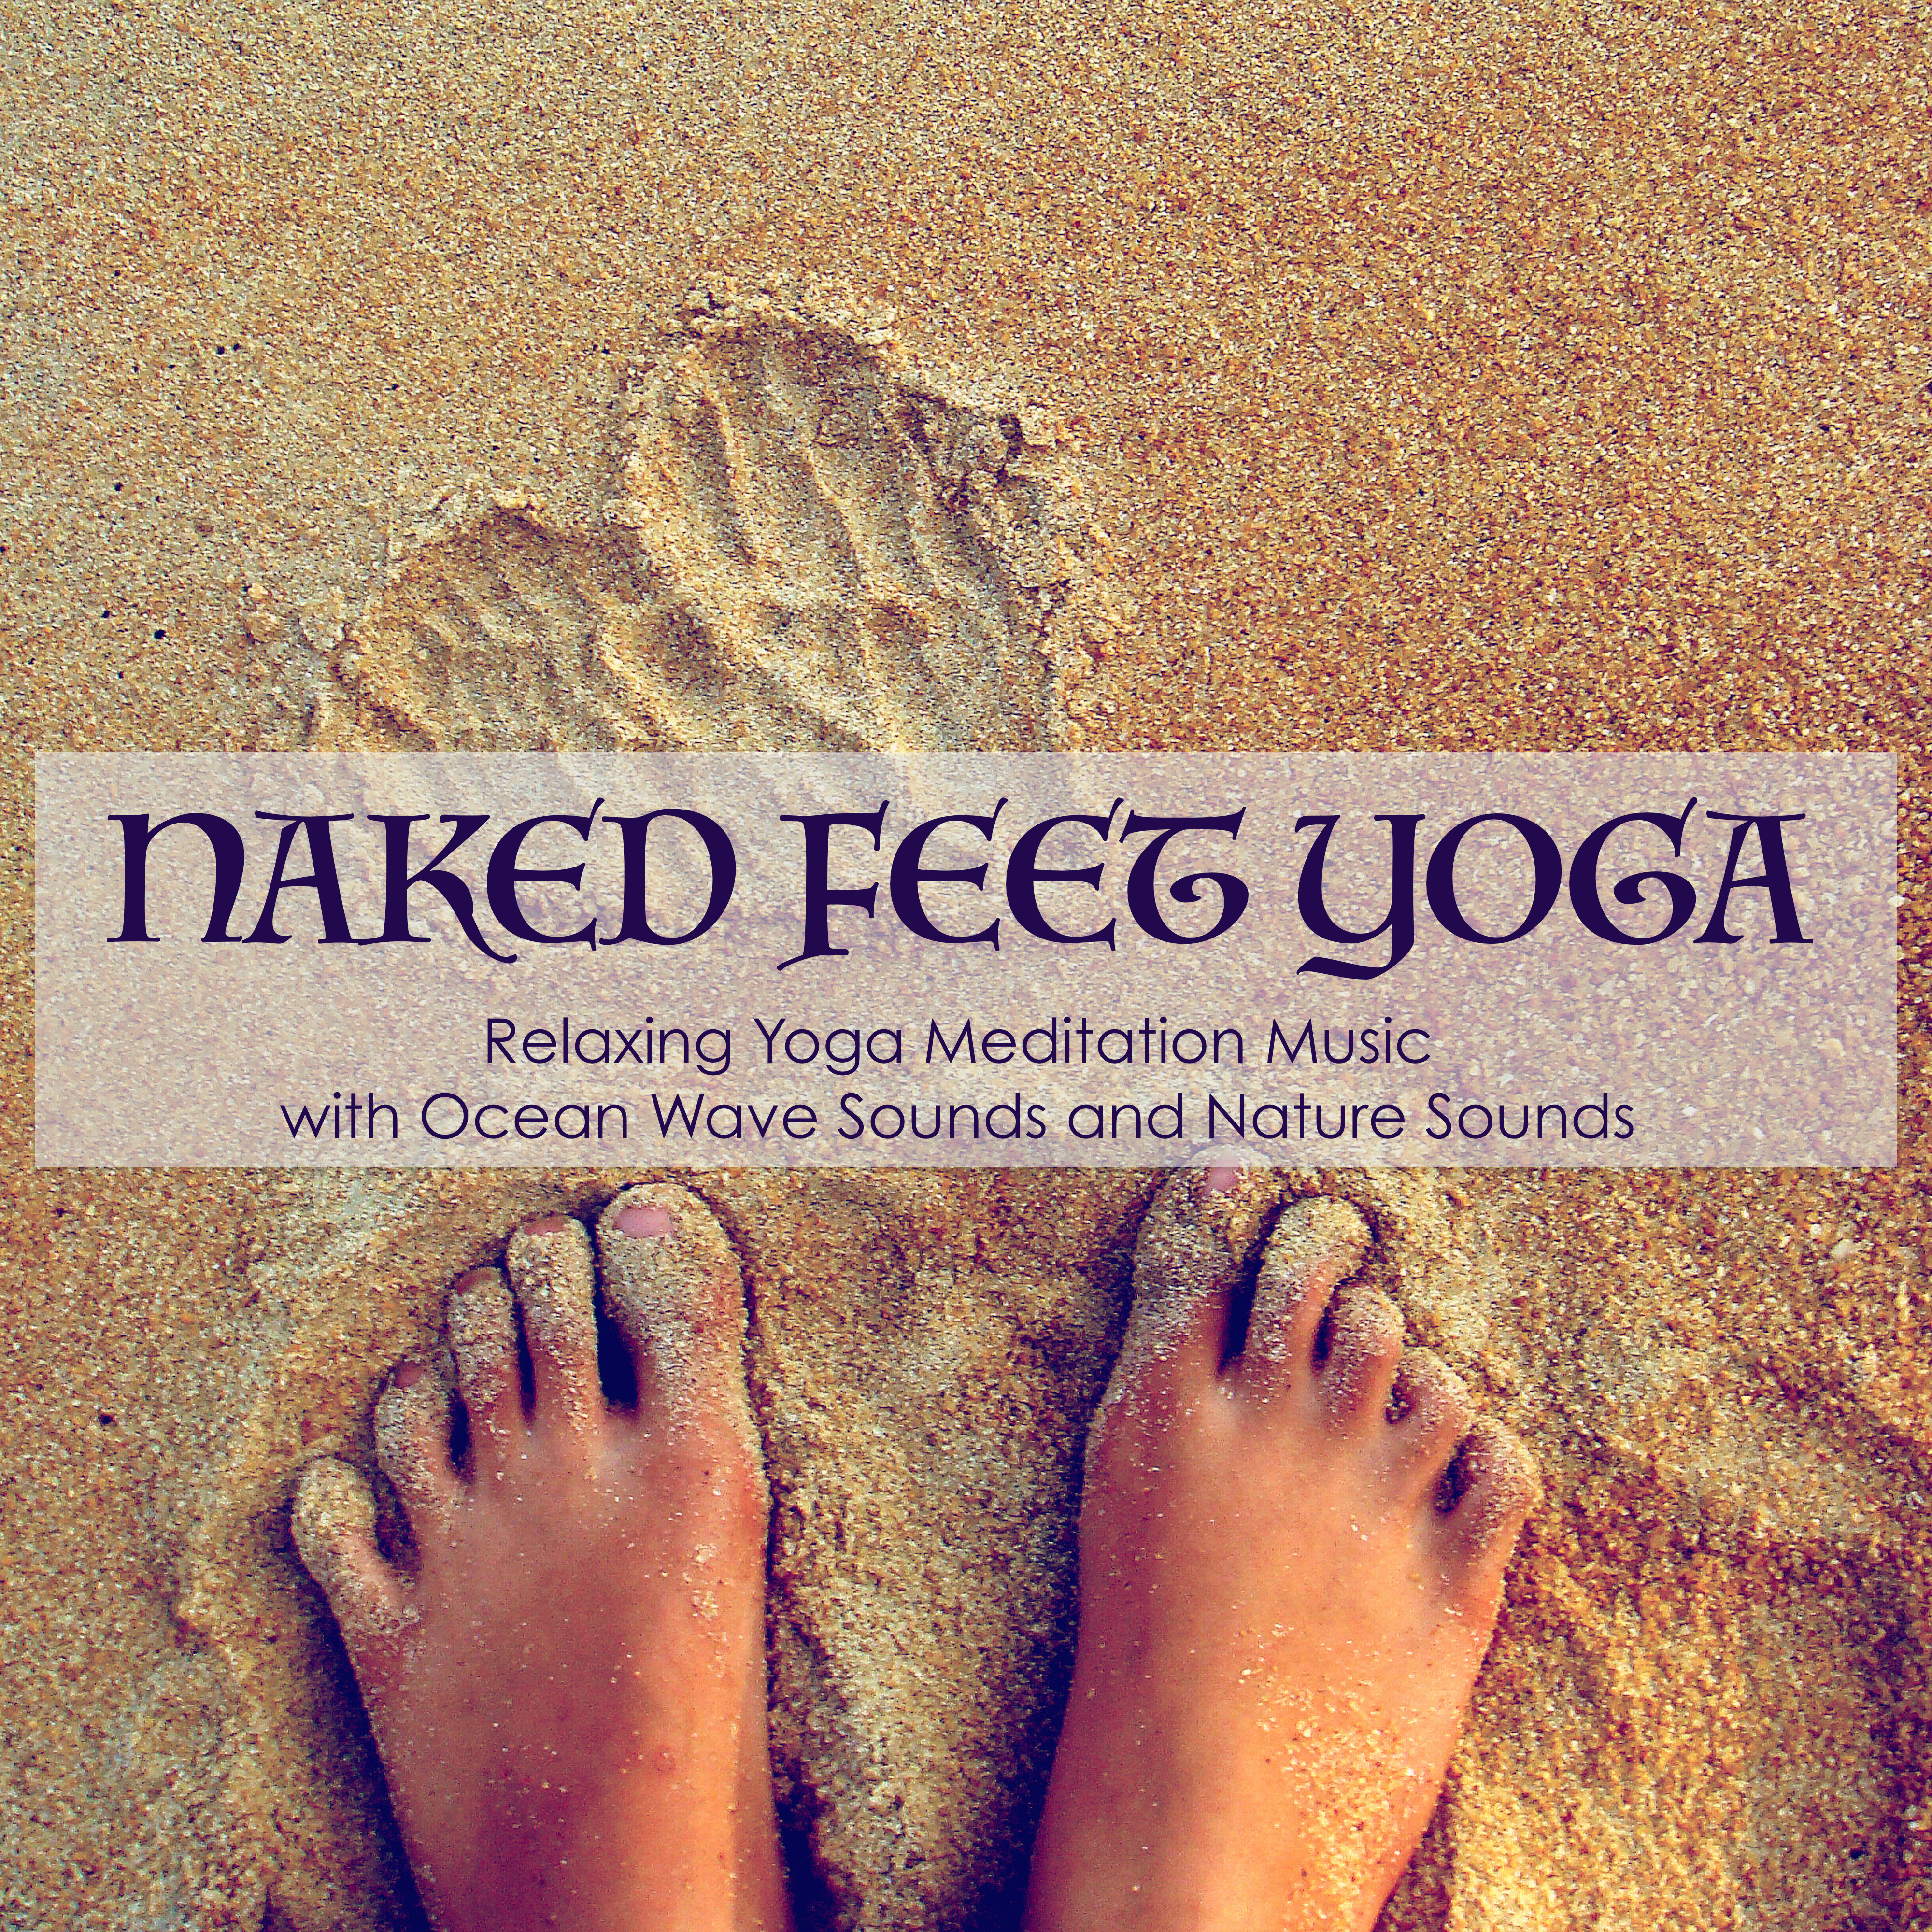 Naked Feet - Meditation Music and Ocean Waves Sounds